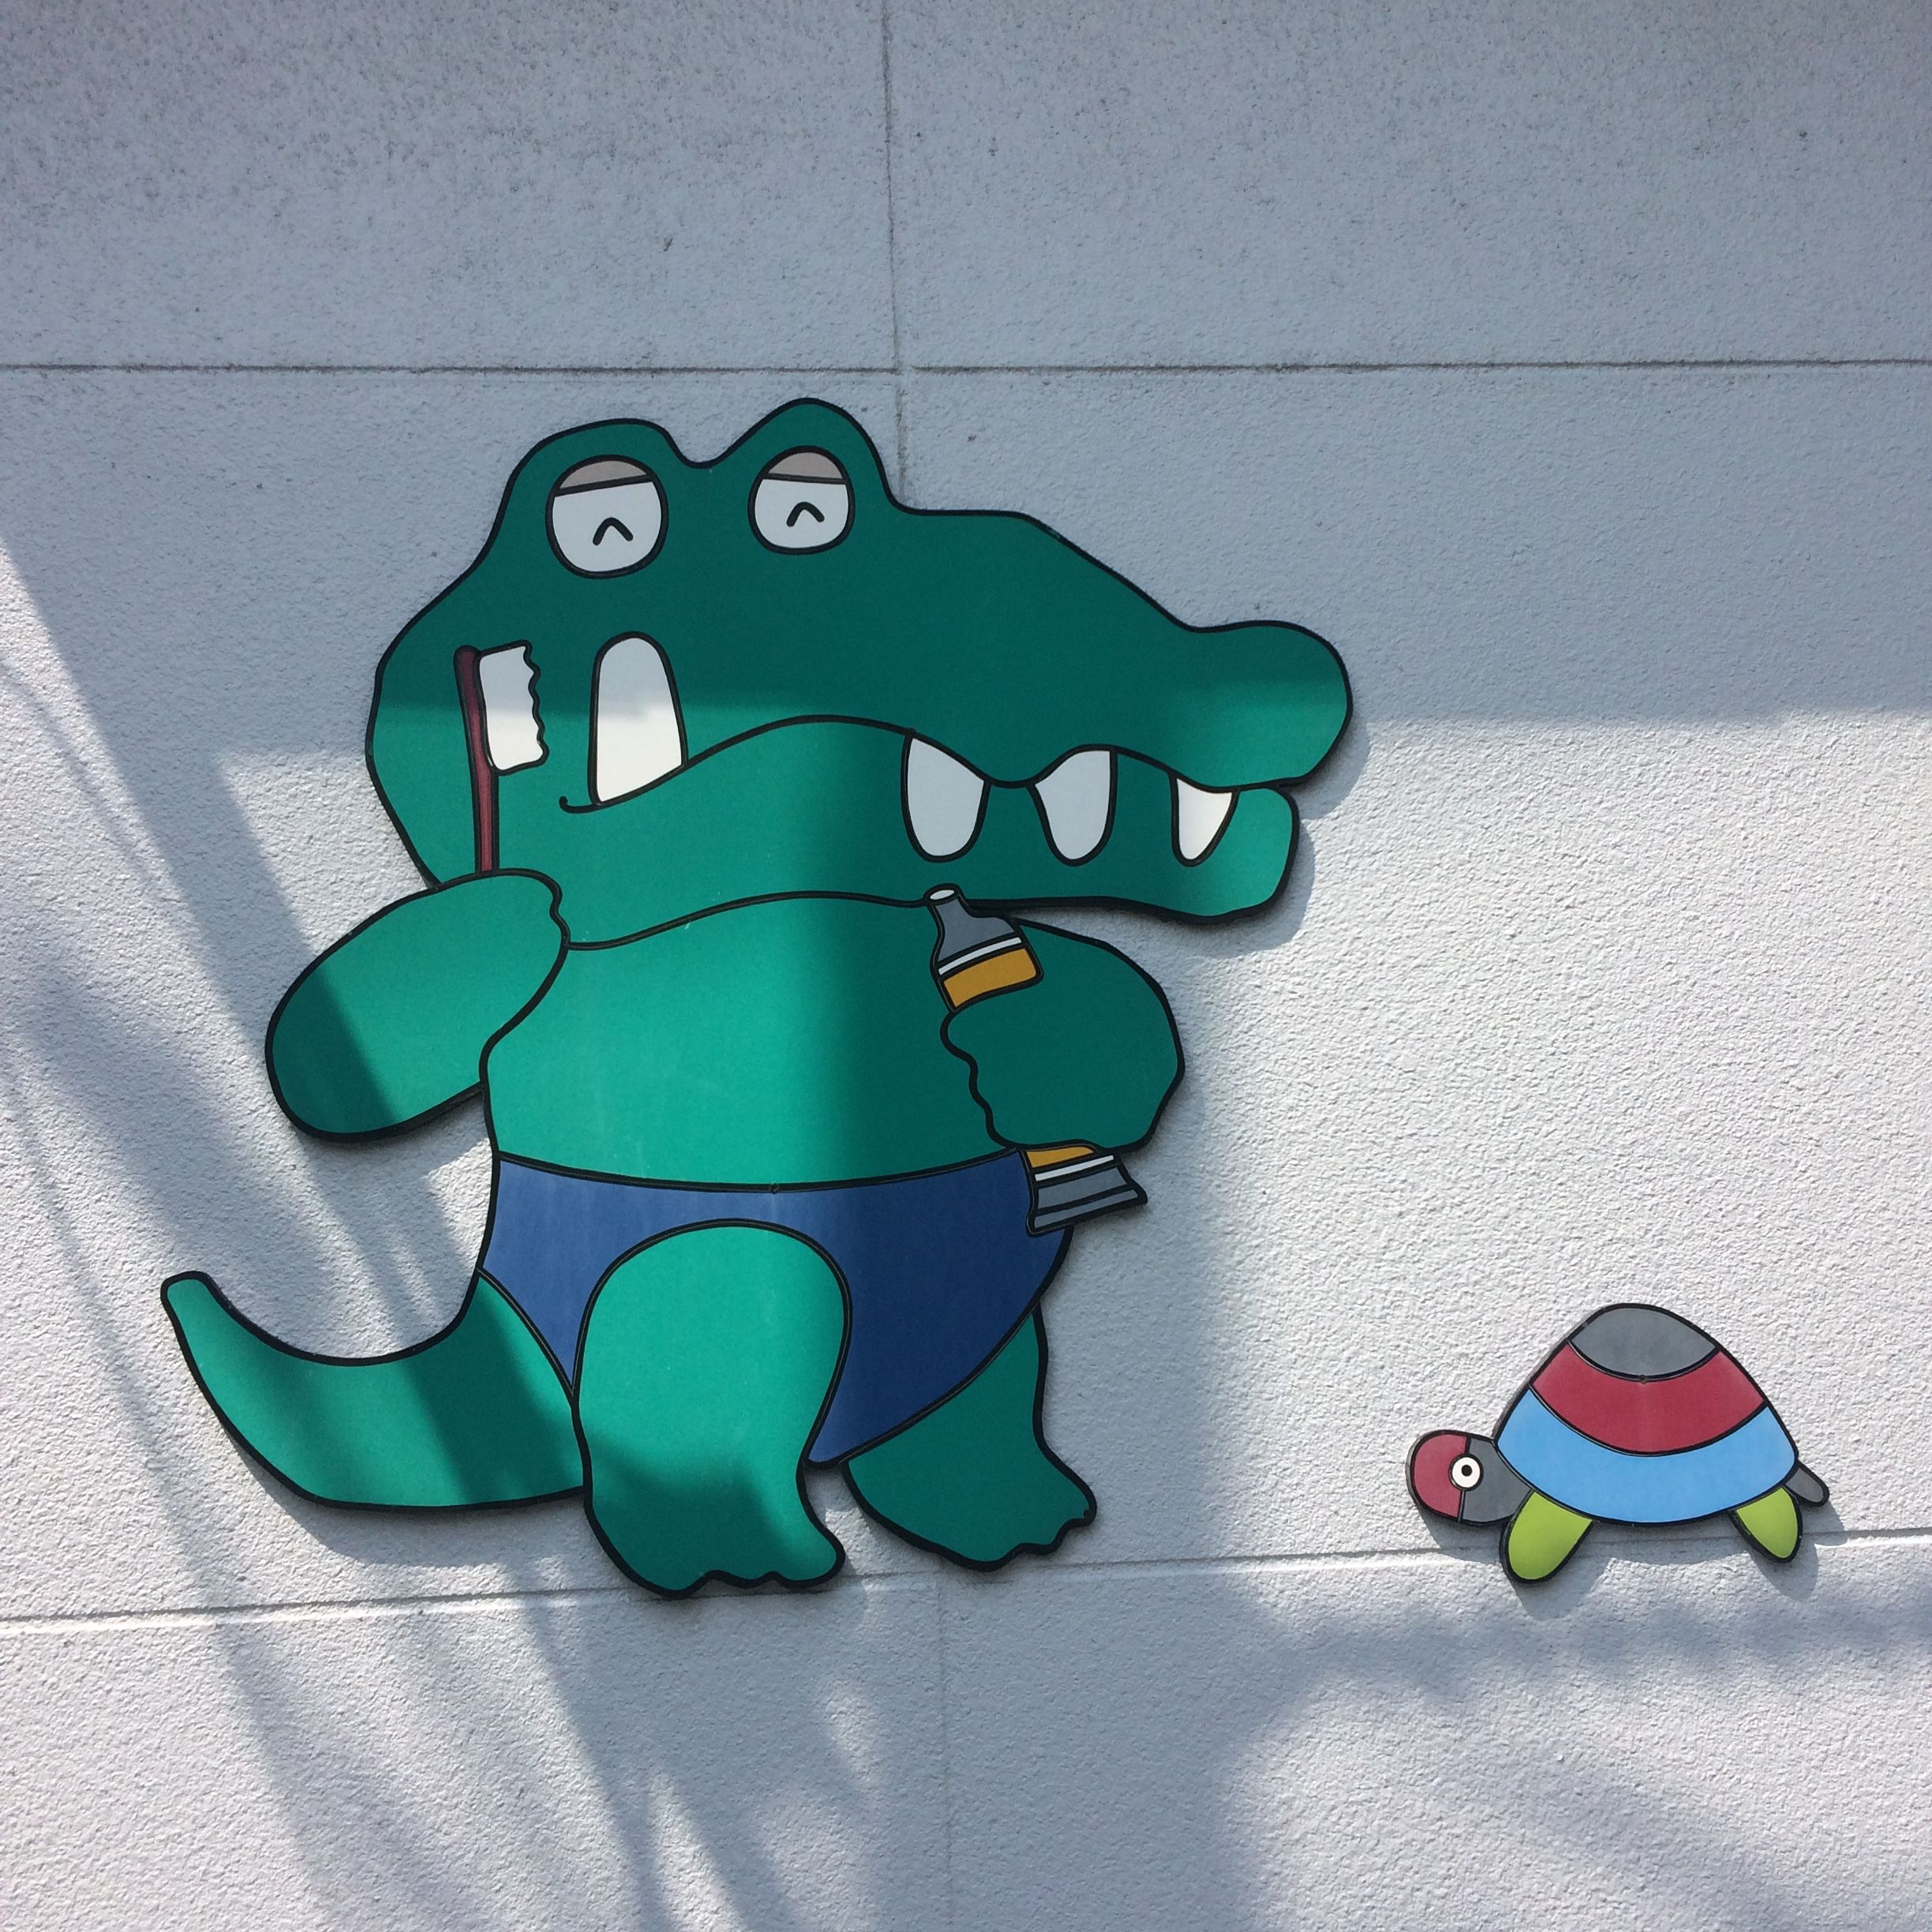 On a wall, a cartoon alligator brushes its teeth while a small tortoise looks on.